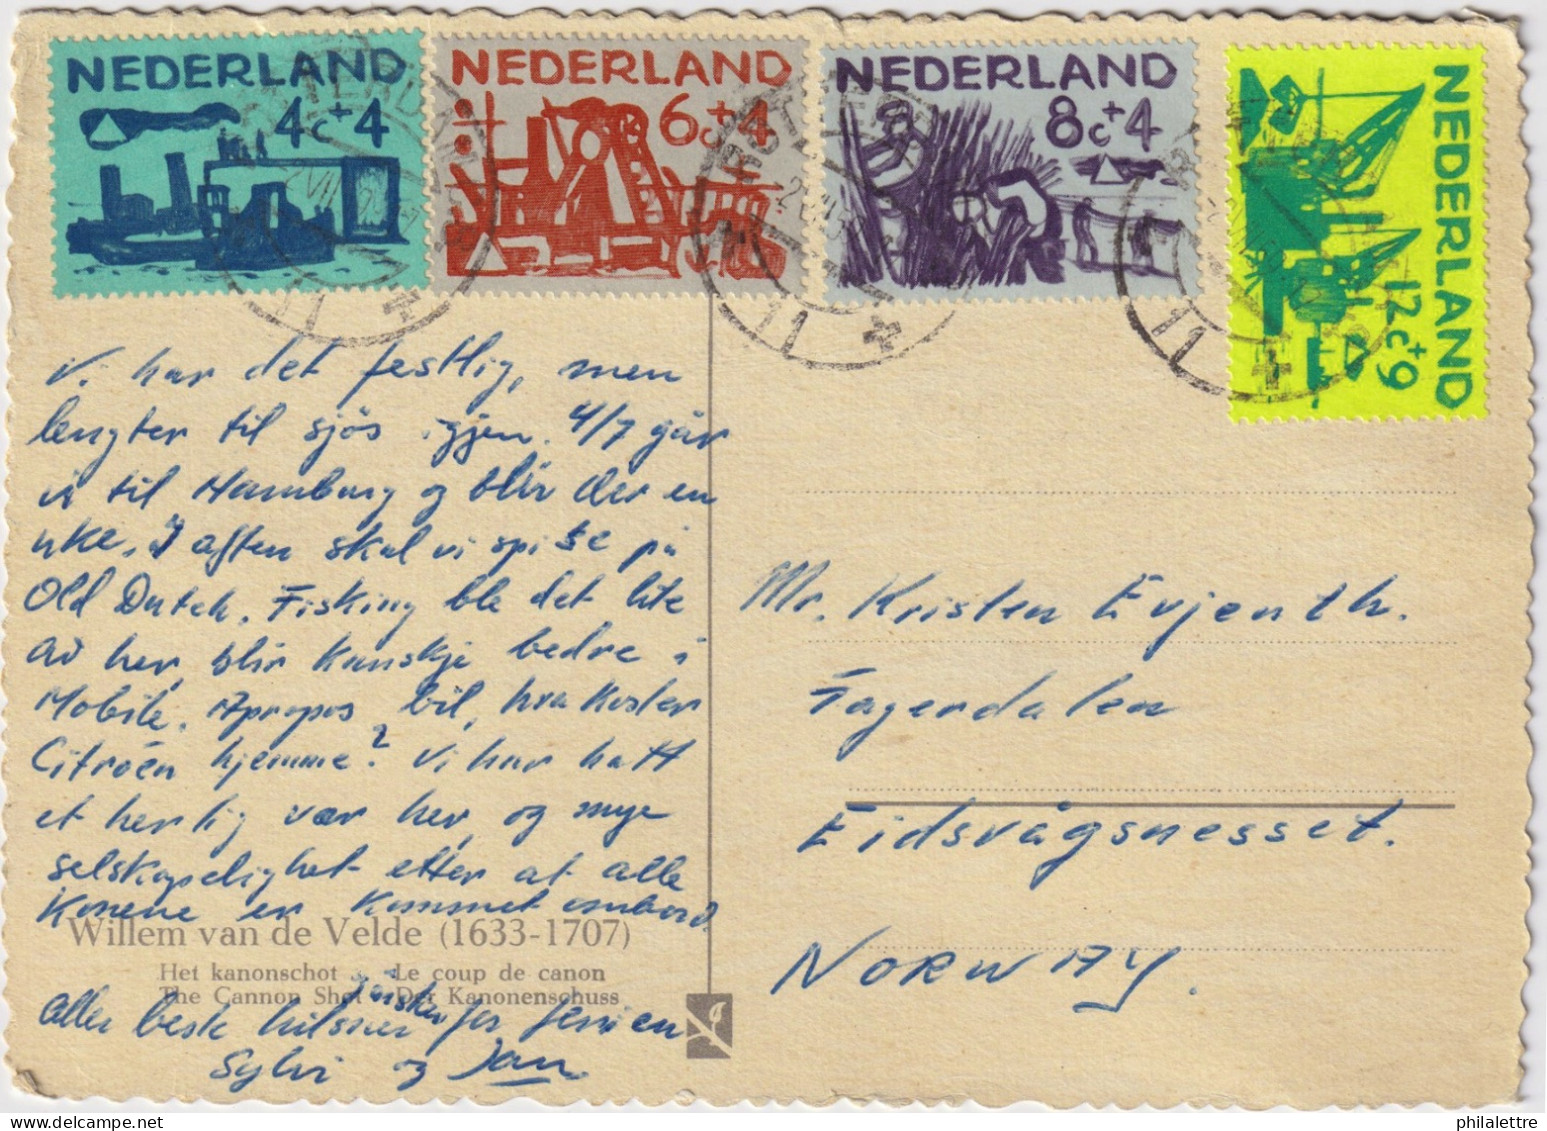 PAYS-BAS / THE NETHERLANDS - 1959 Mi.730, 731, 732 & 733 On Card From ROTTERDAM To EIDSVAG, MESSET, Norway - Cartas & Documentos